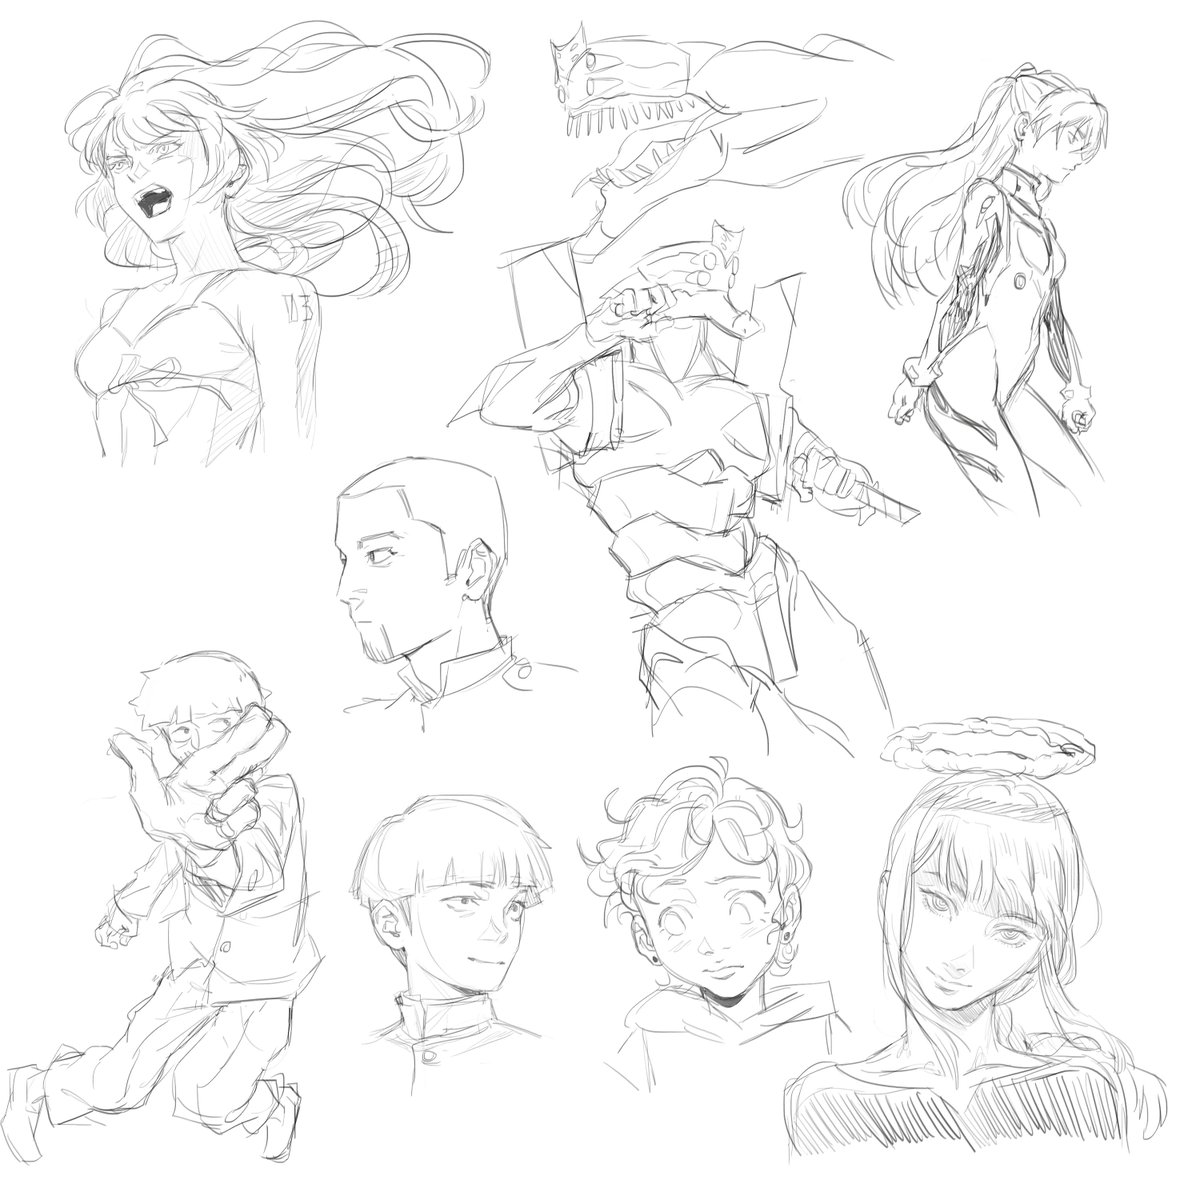 aur here's some sketches i did on this one canvas over the course of the quarter 